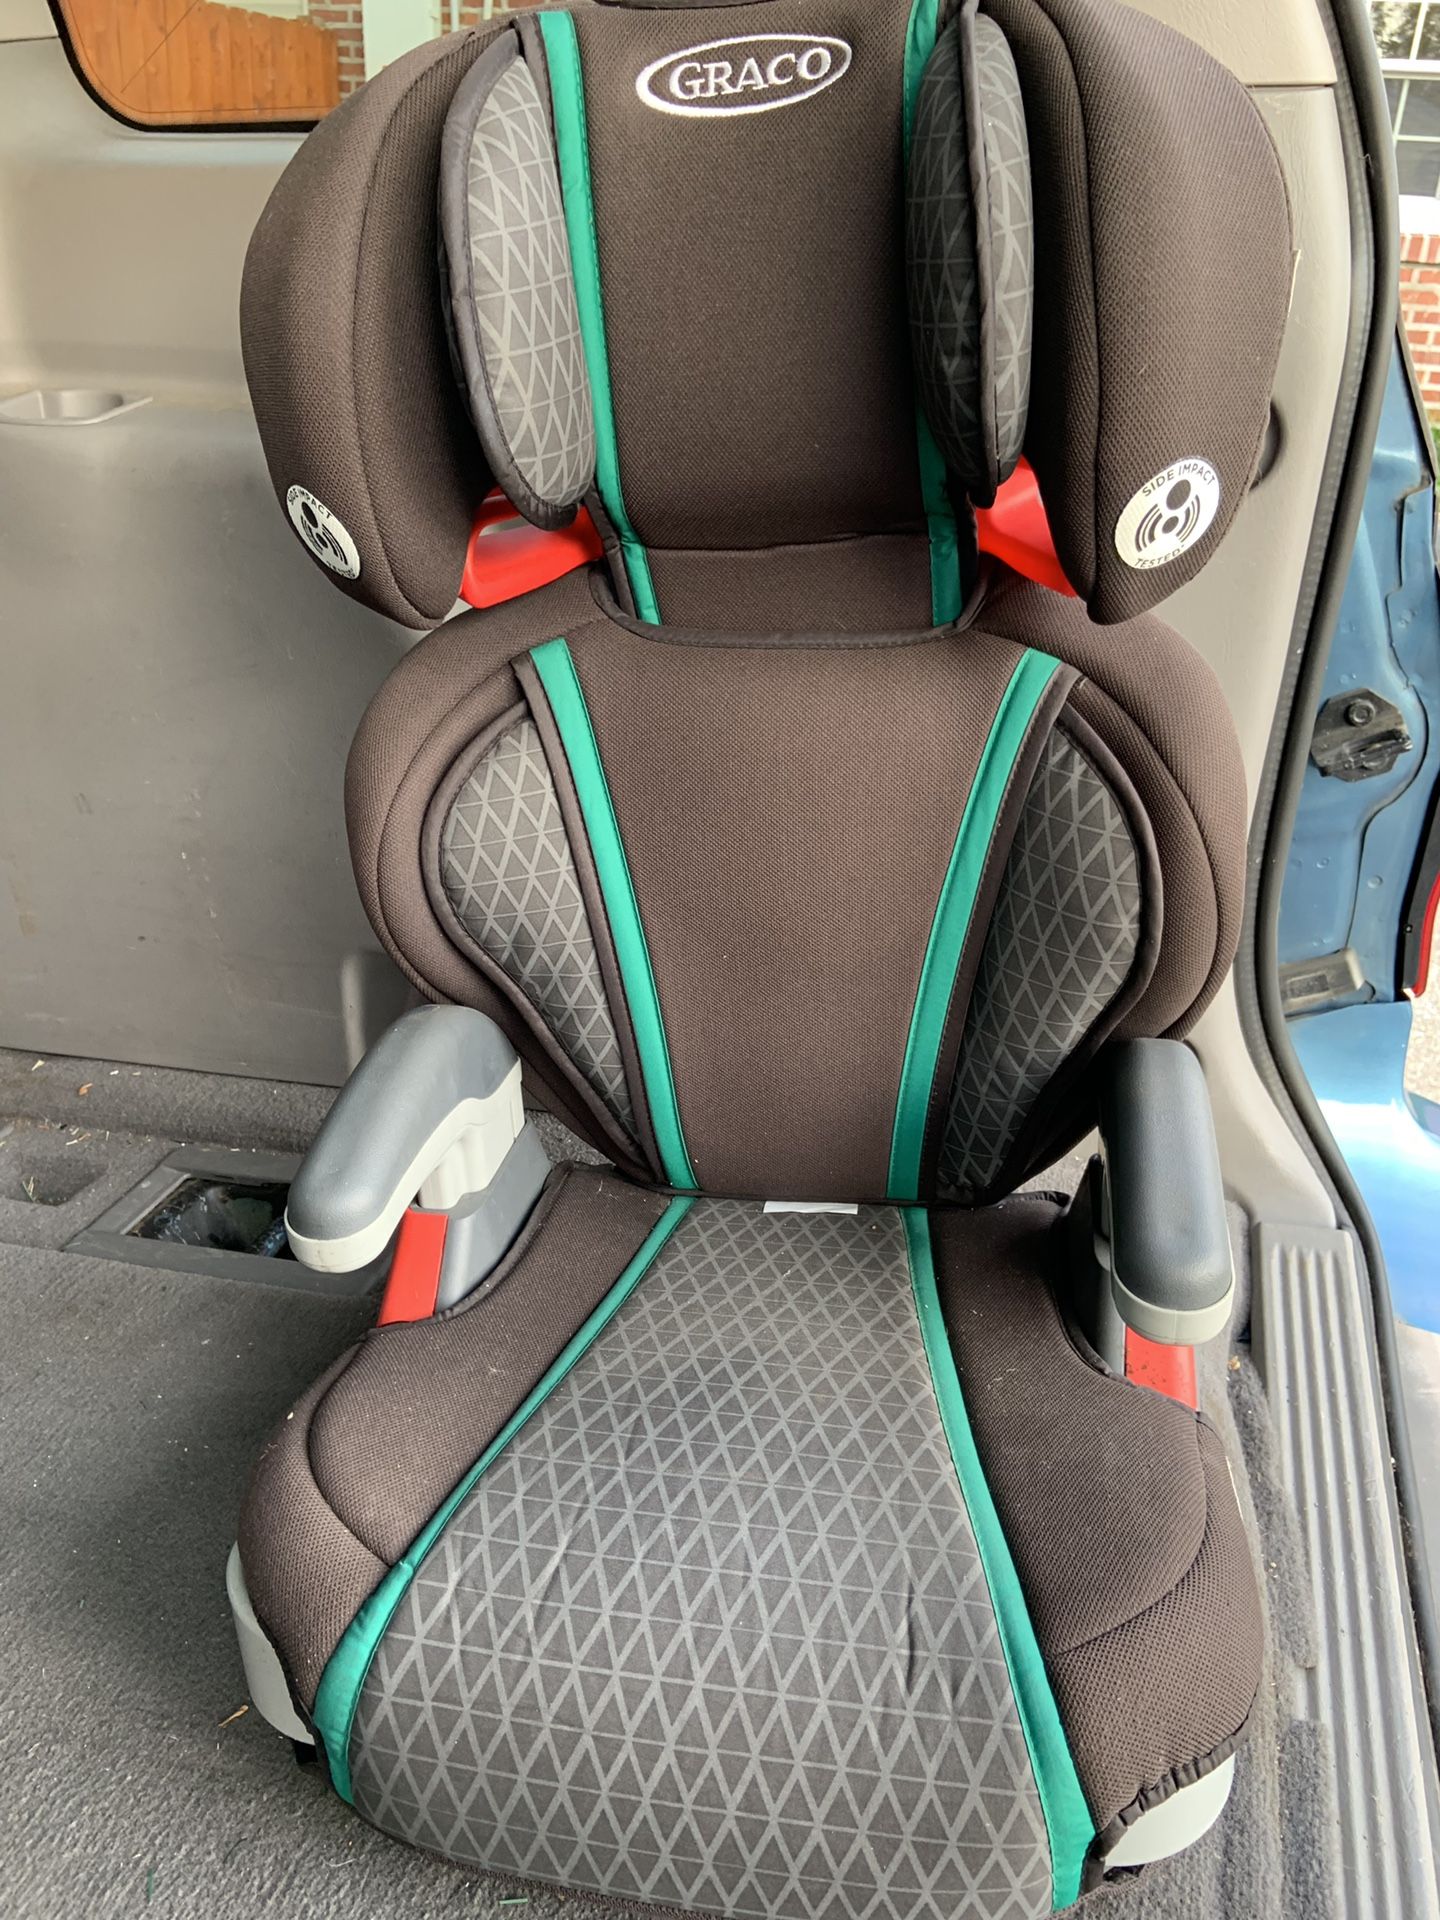 Graco car seat/booster seat